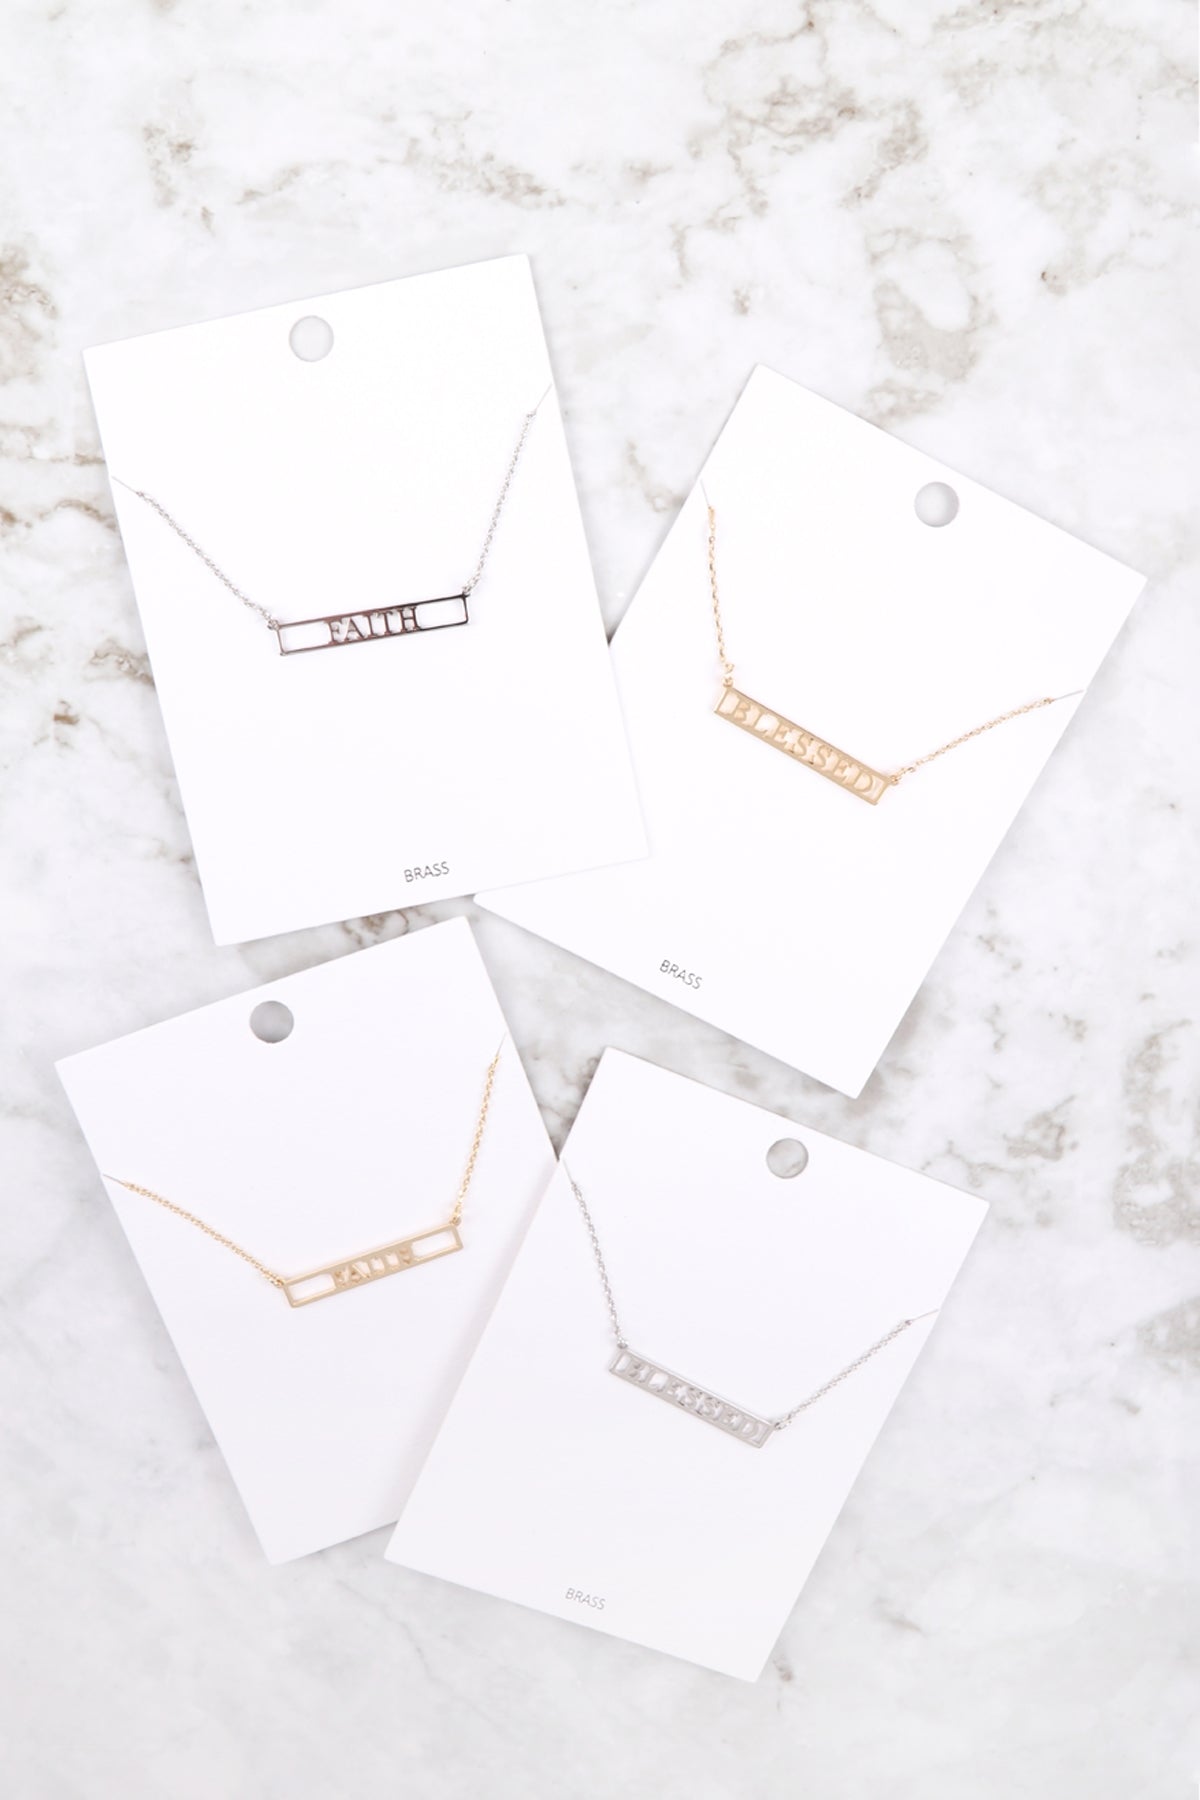 CUT OUT BAR NECKLACE (NOW $2.00 ONLY!)